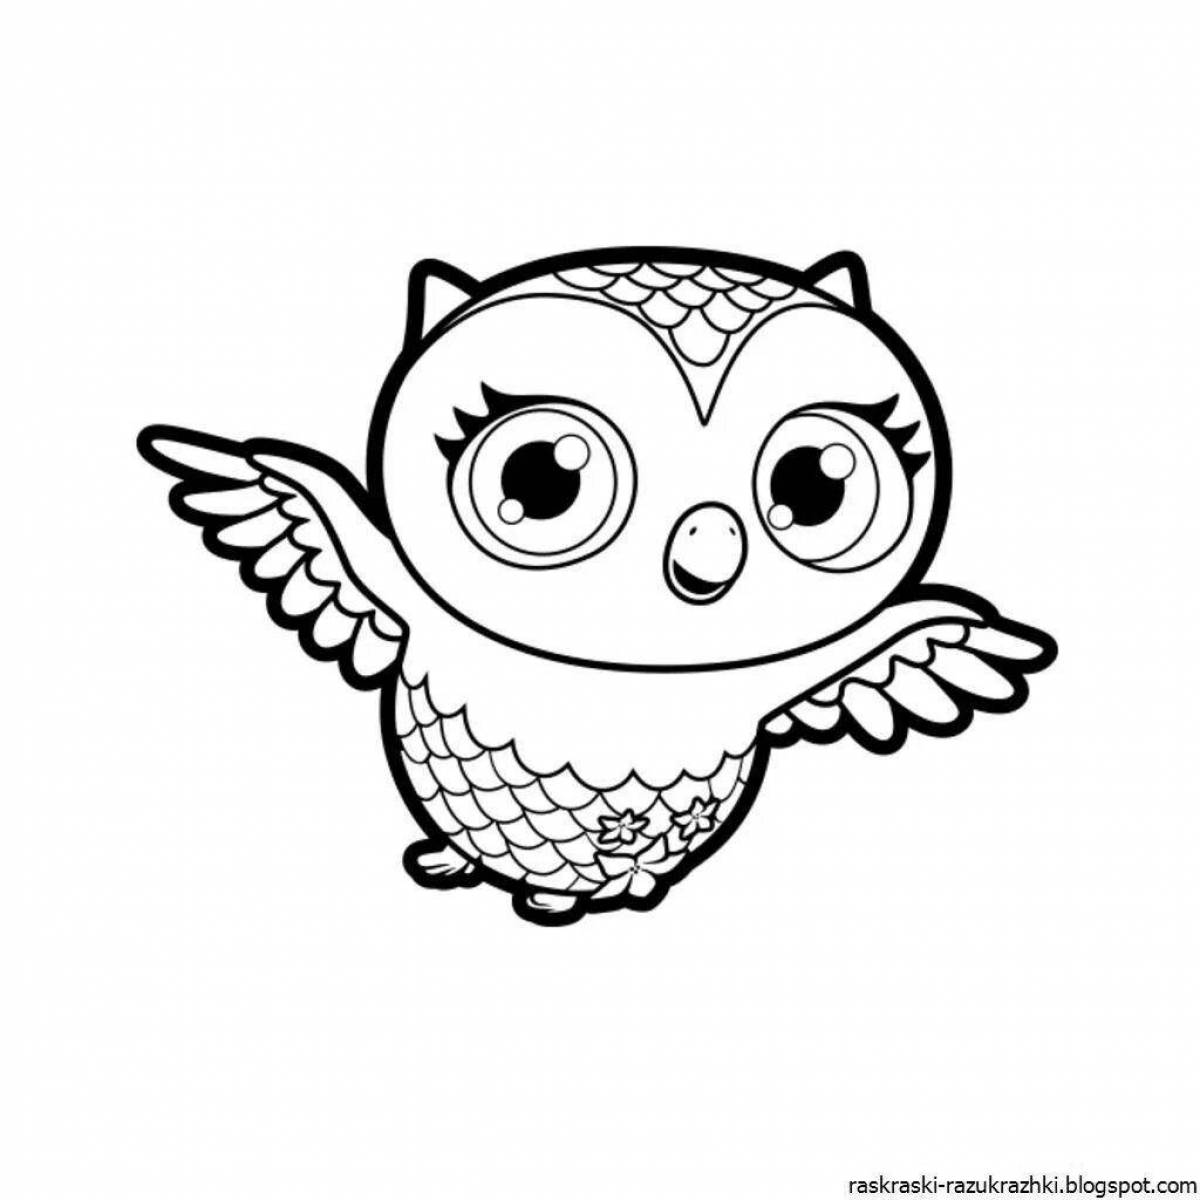 Coloring book sparkling cute owl